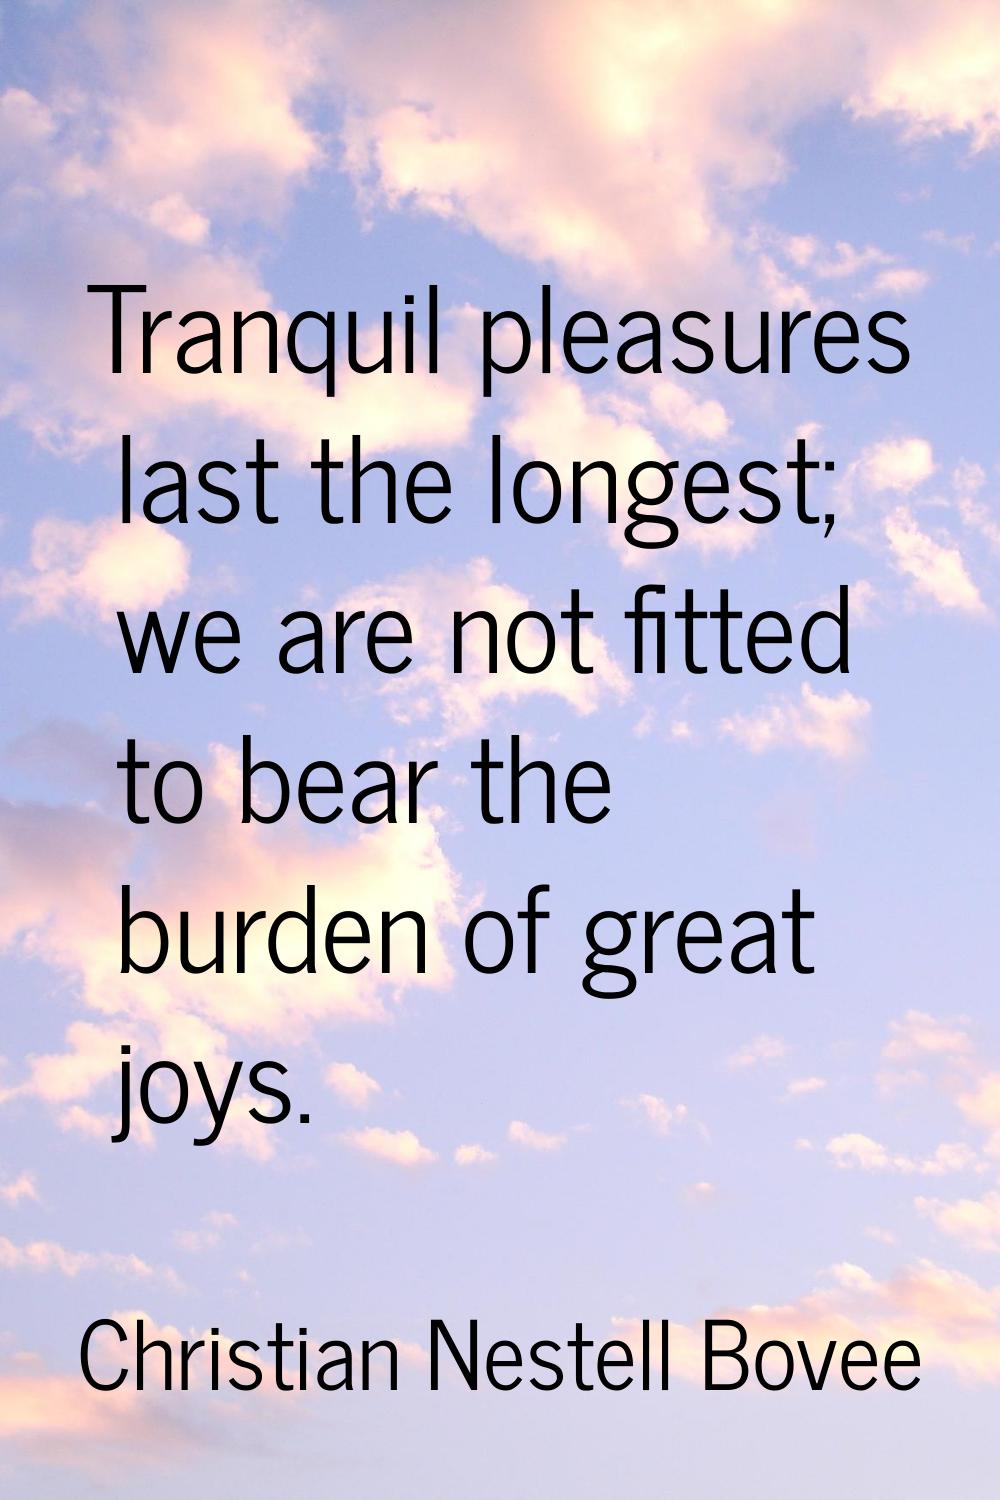 Tranquil pleasures last the longest; we are not fitted to bear the burden of great joys.